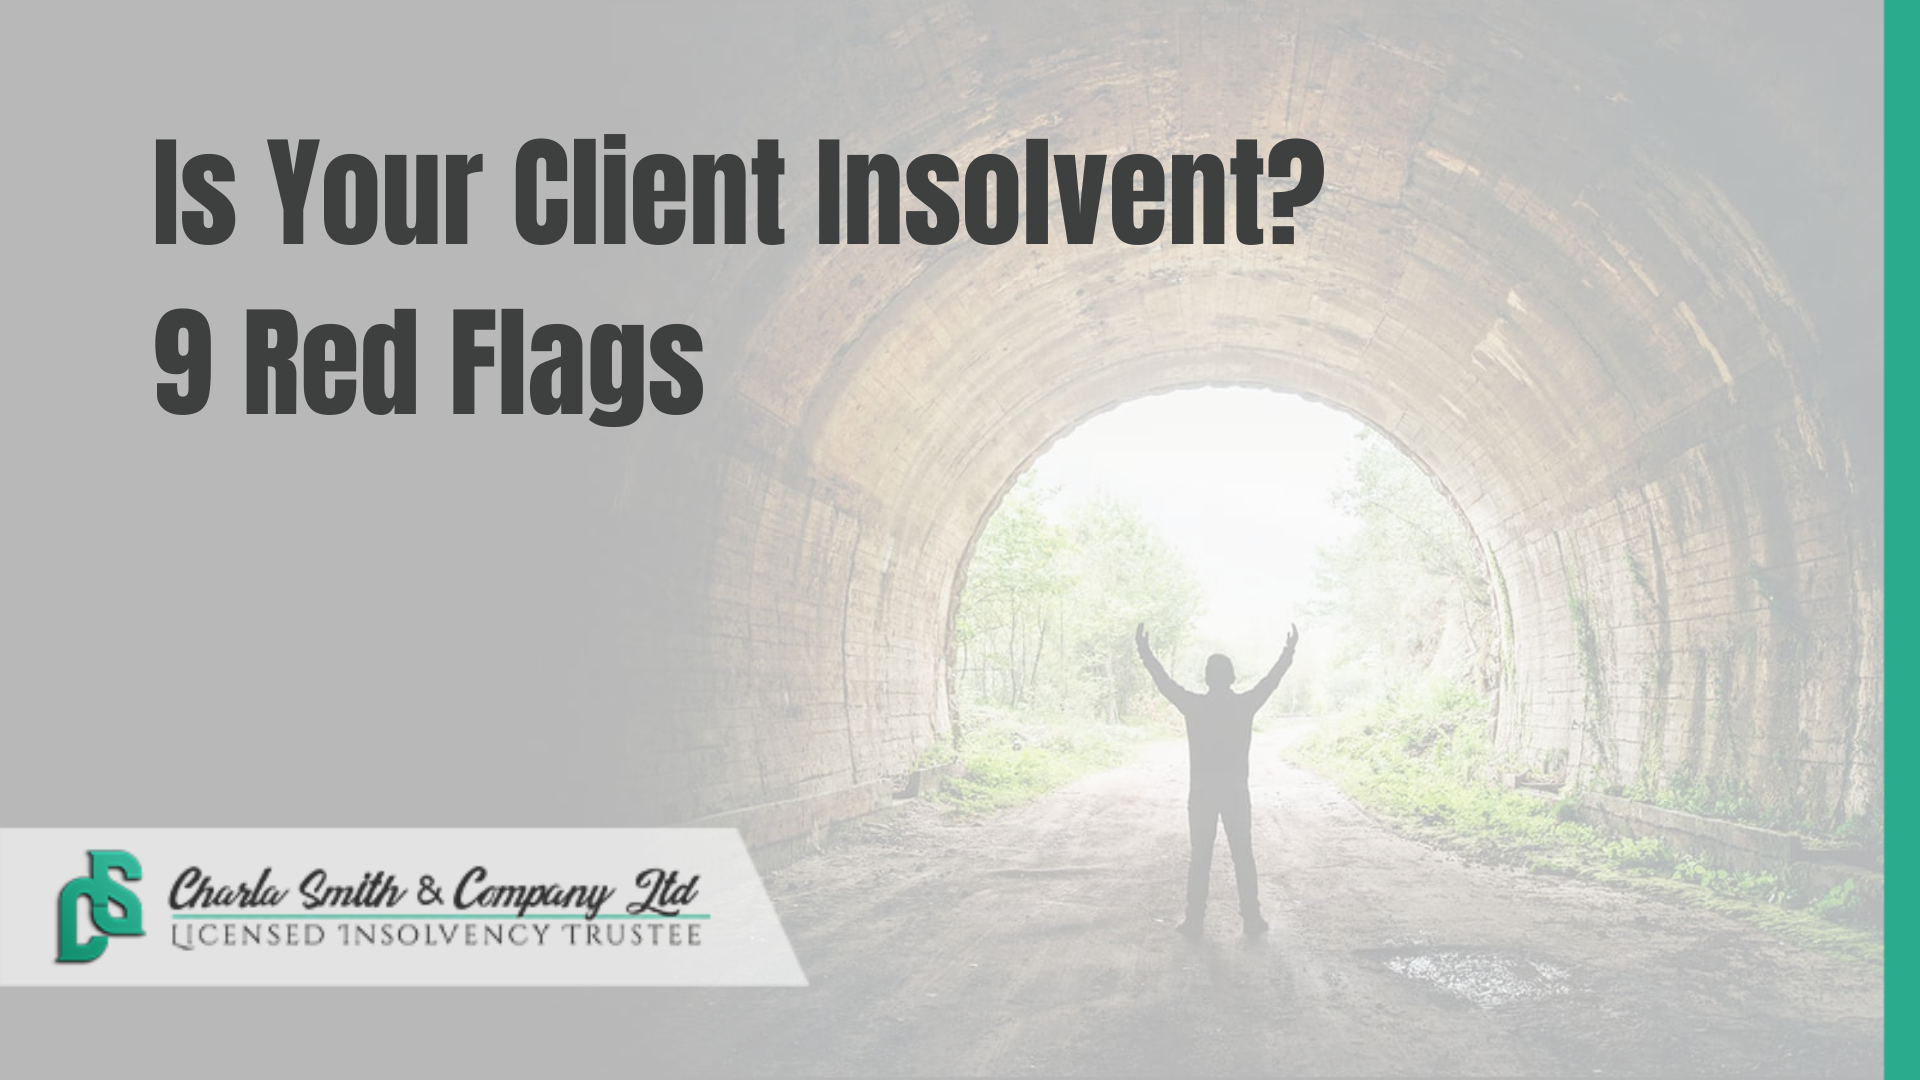 Is Your Client Insolvent? 9 Red Flags